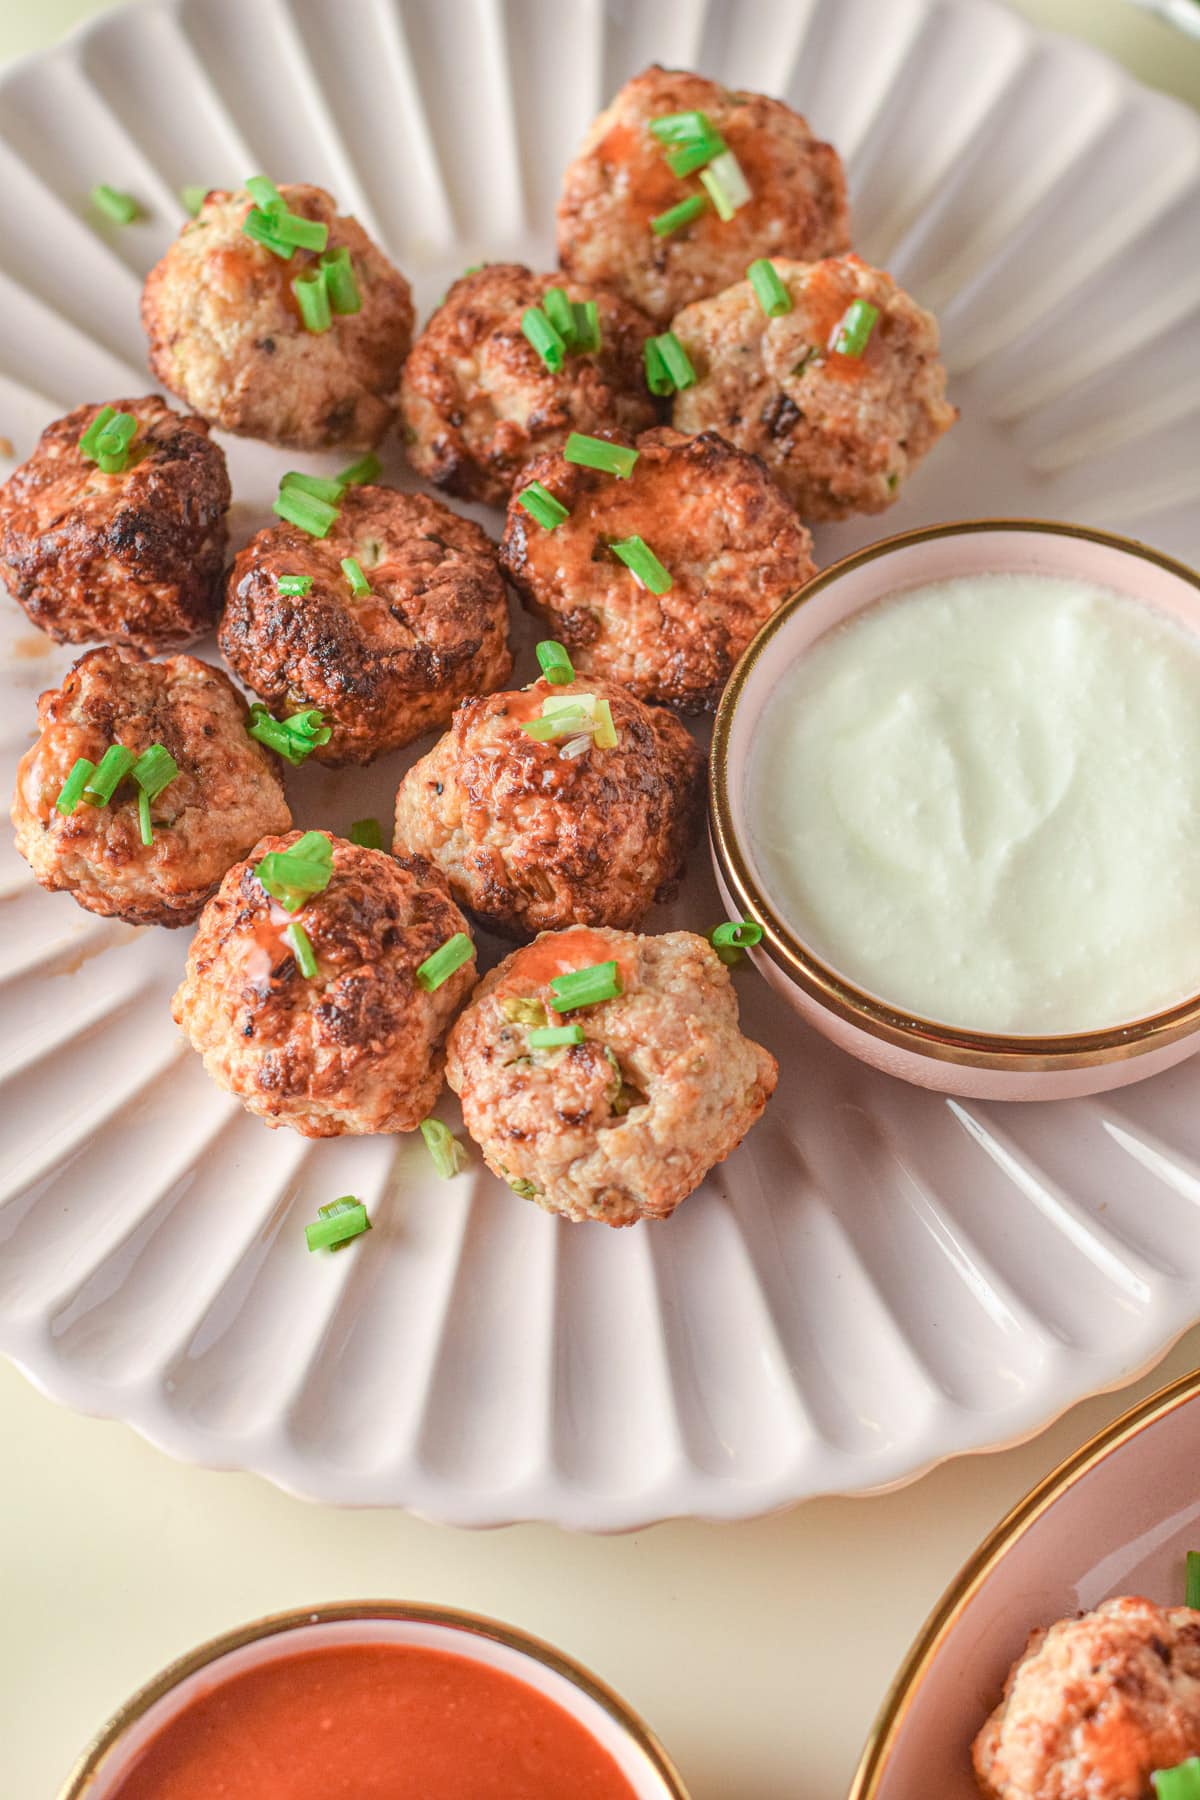 Meatballs with white dipping sauce